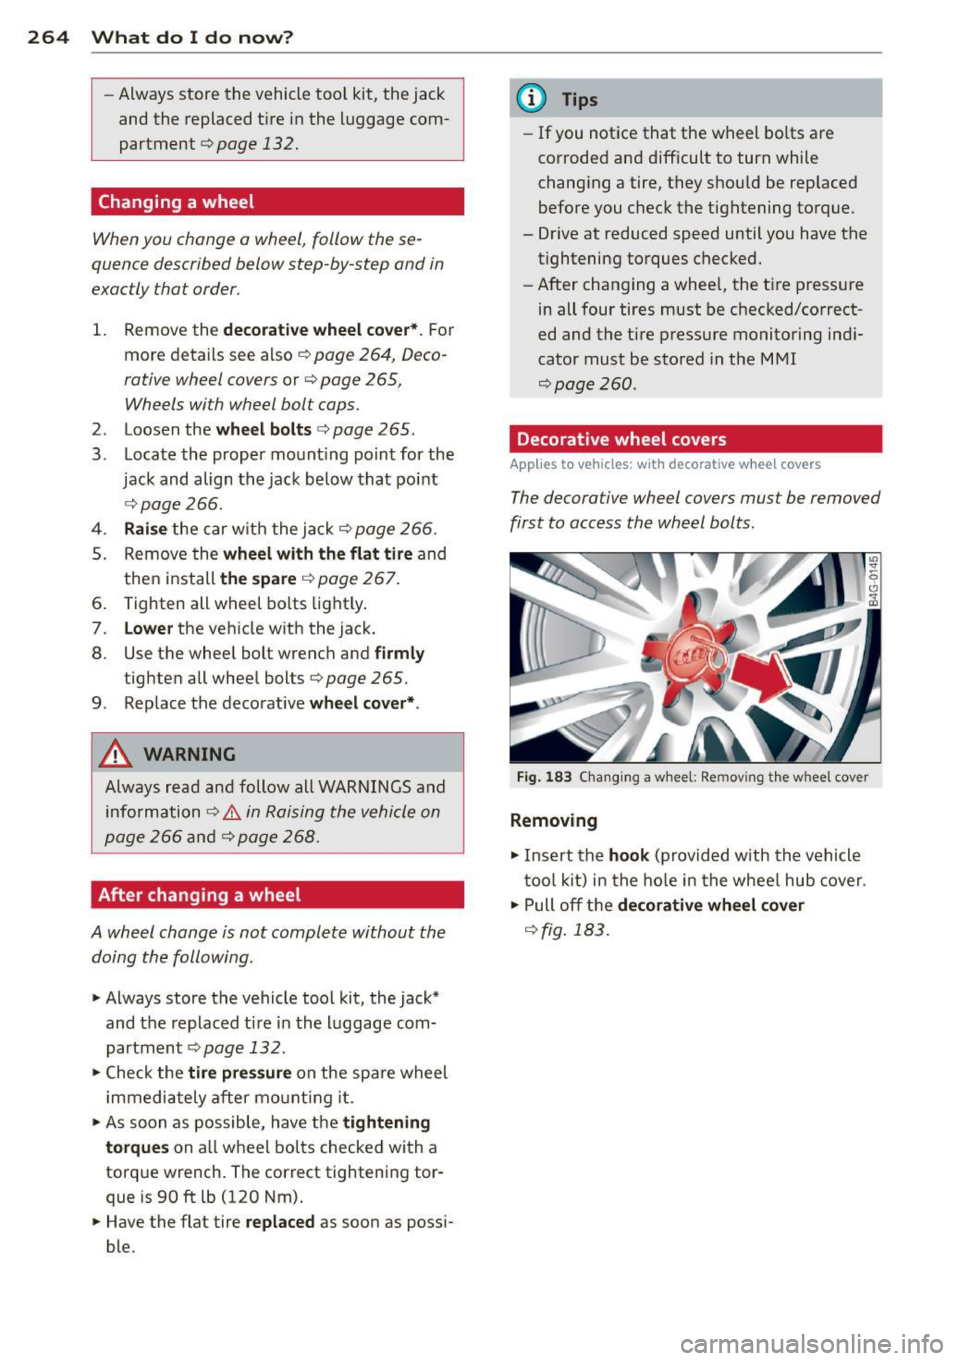 AUDI A3 CABRIOLET 2015  Owners Manual 264  What  do I do  now? 
-Always store  the  vehicle  tool  kit,  the  jack 
and  the  replaced  tir e  in  the  luggage  com­
partment ¢ 
page  132. 
Changing  a wheel 
When you  change  o  wheel,